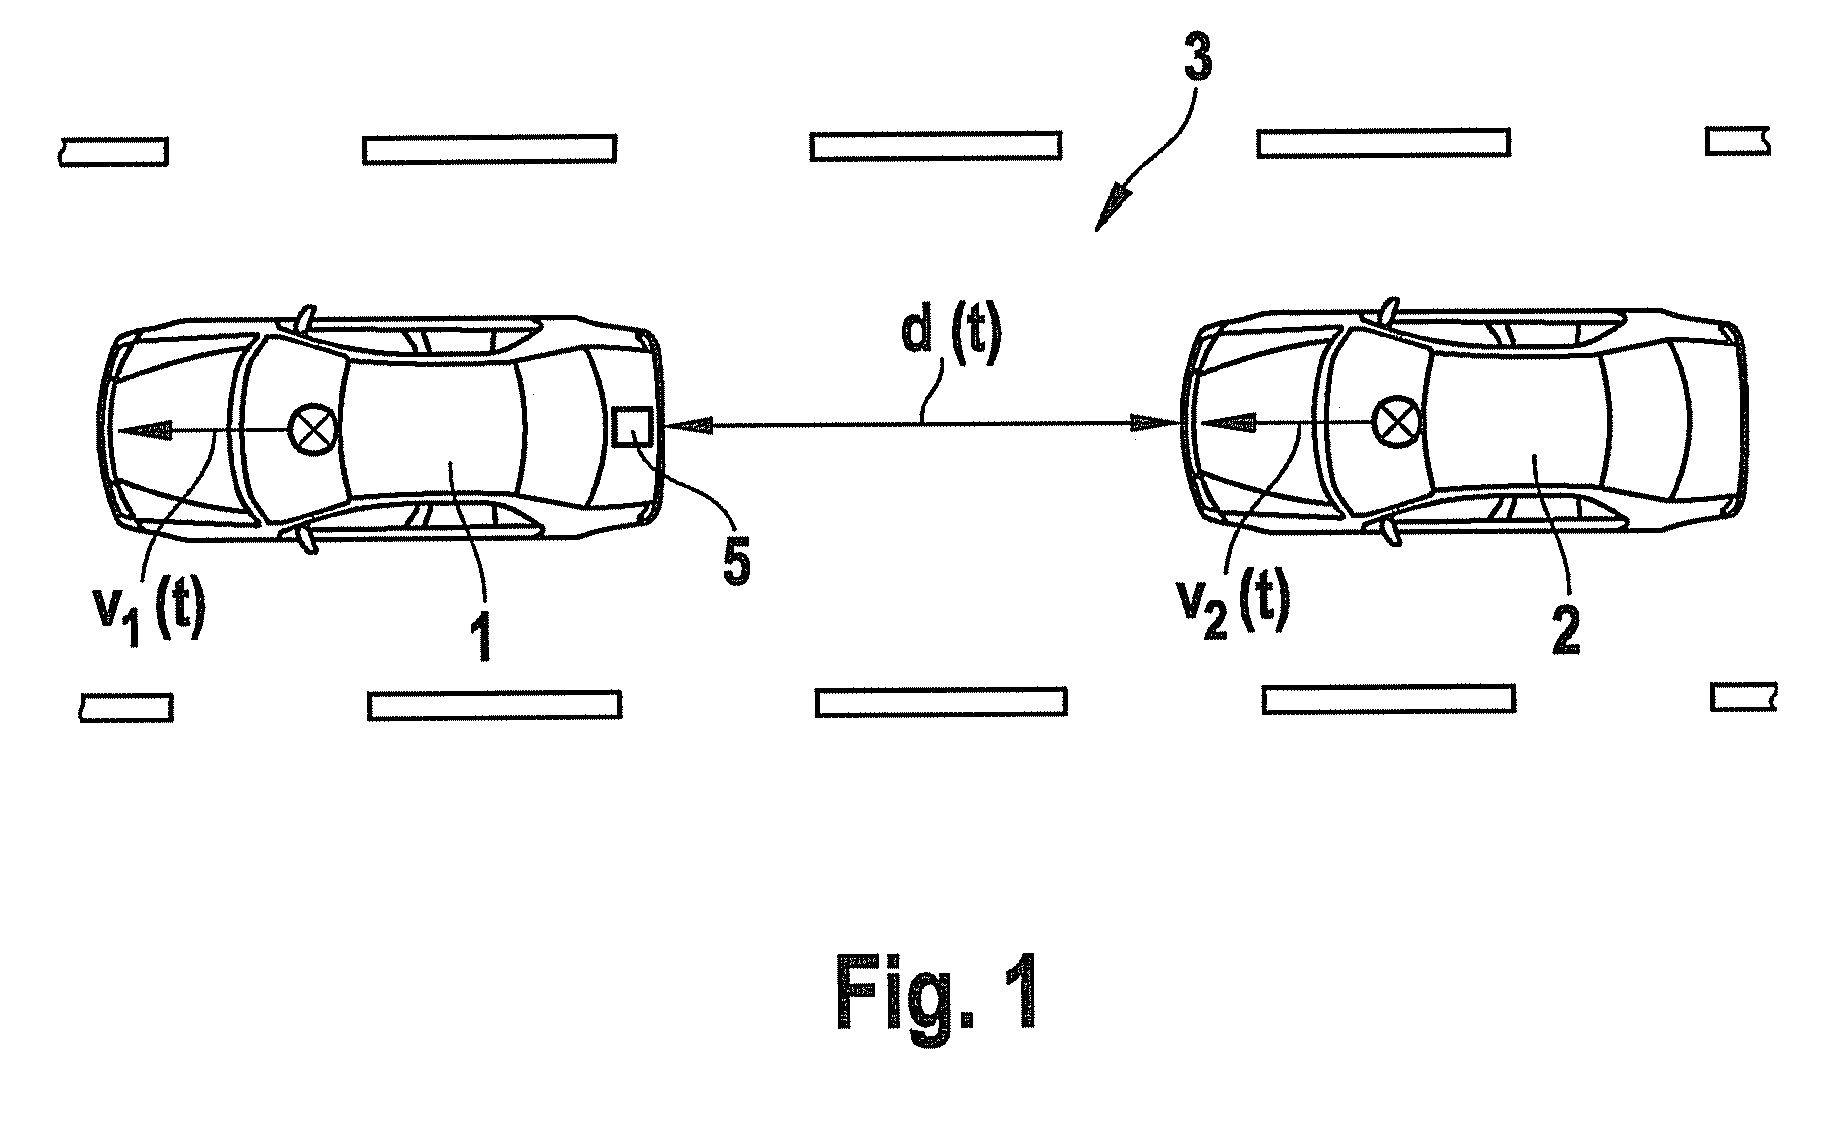 Prevention of a rear crash during an automatic braking intervention by a vehicle safety system